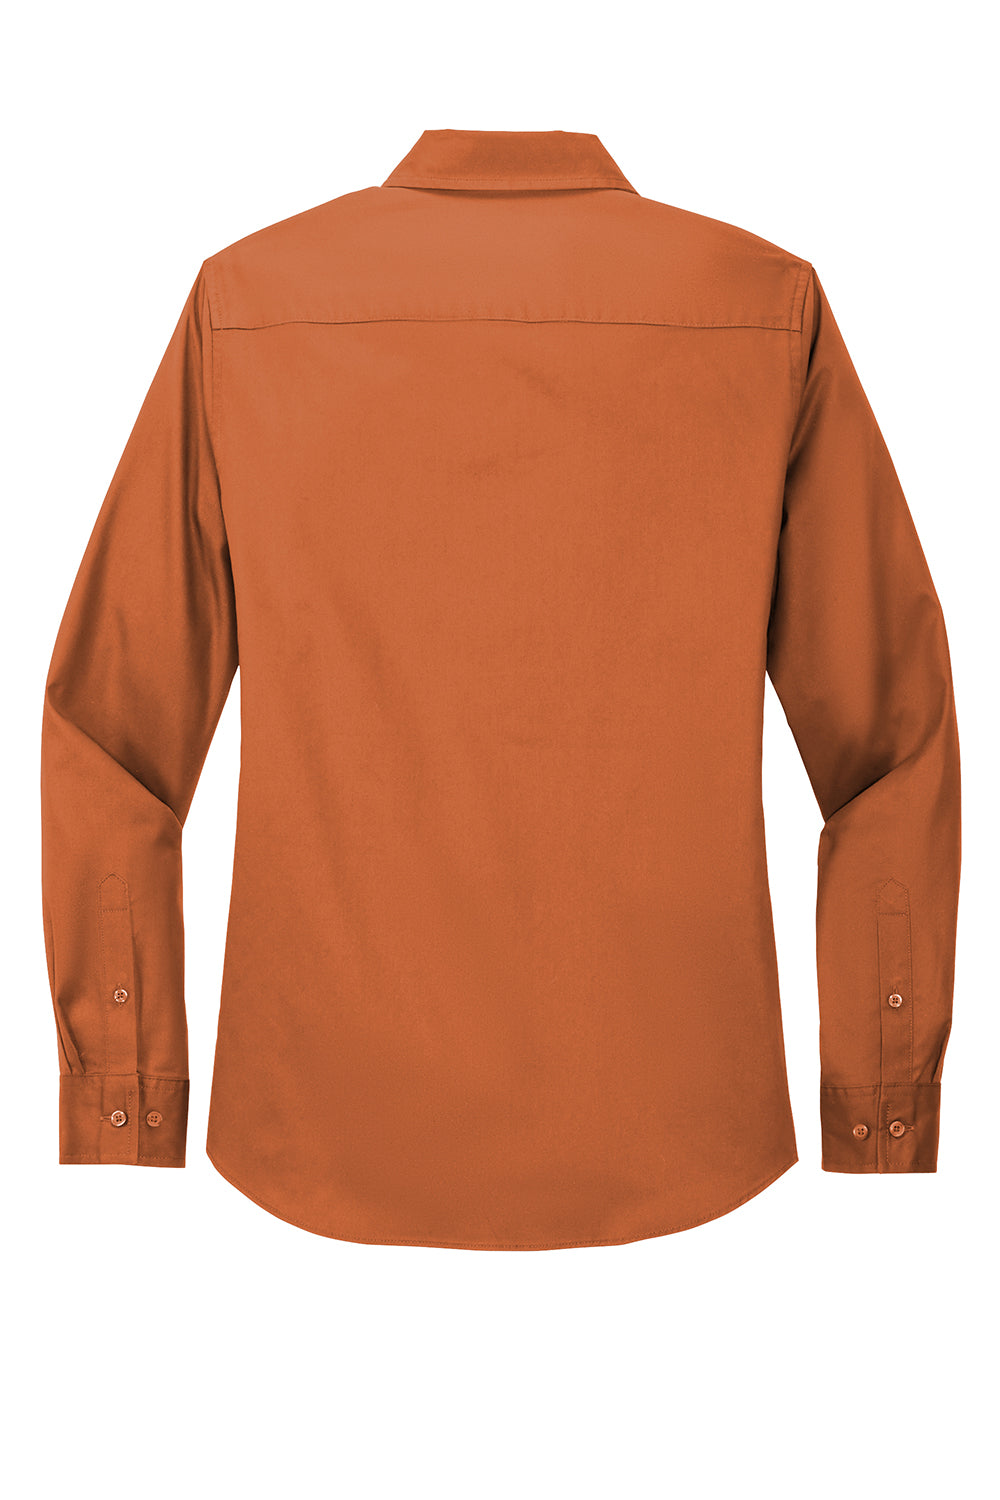 Port Authority L608 Womens Easy Care Wrinkle Resistant Long Sleeve Button Down Shirt Texas Orange Flat Back